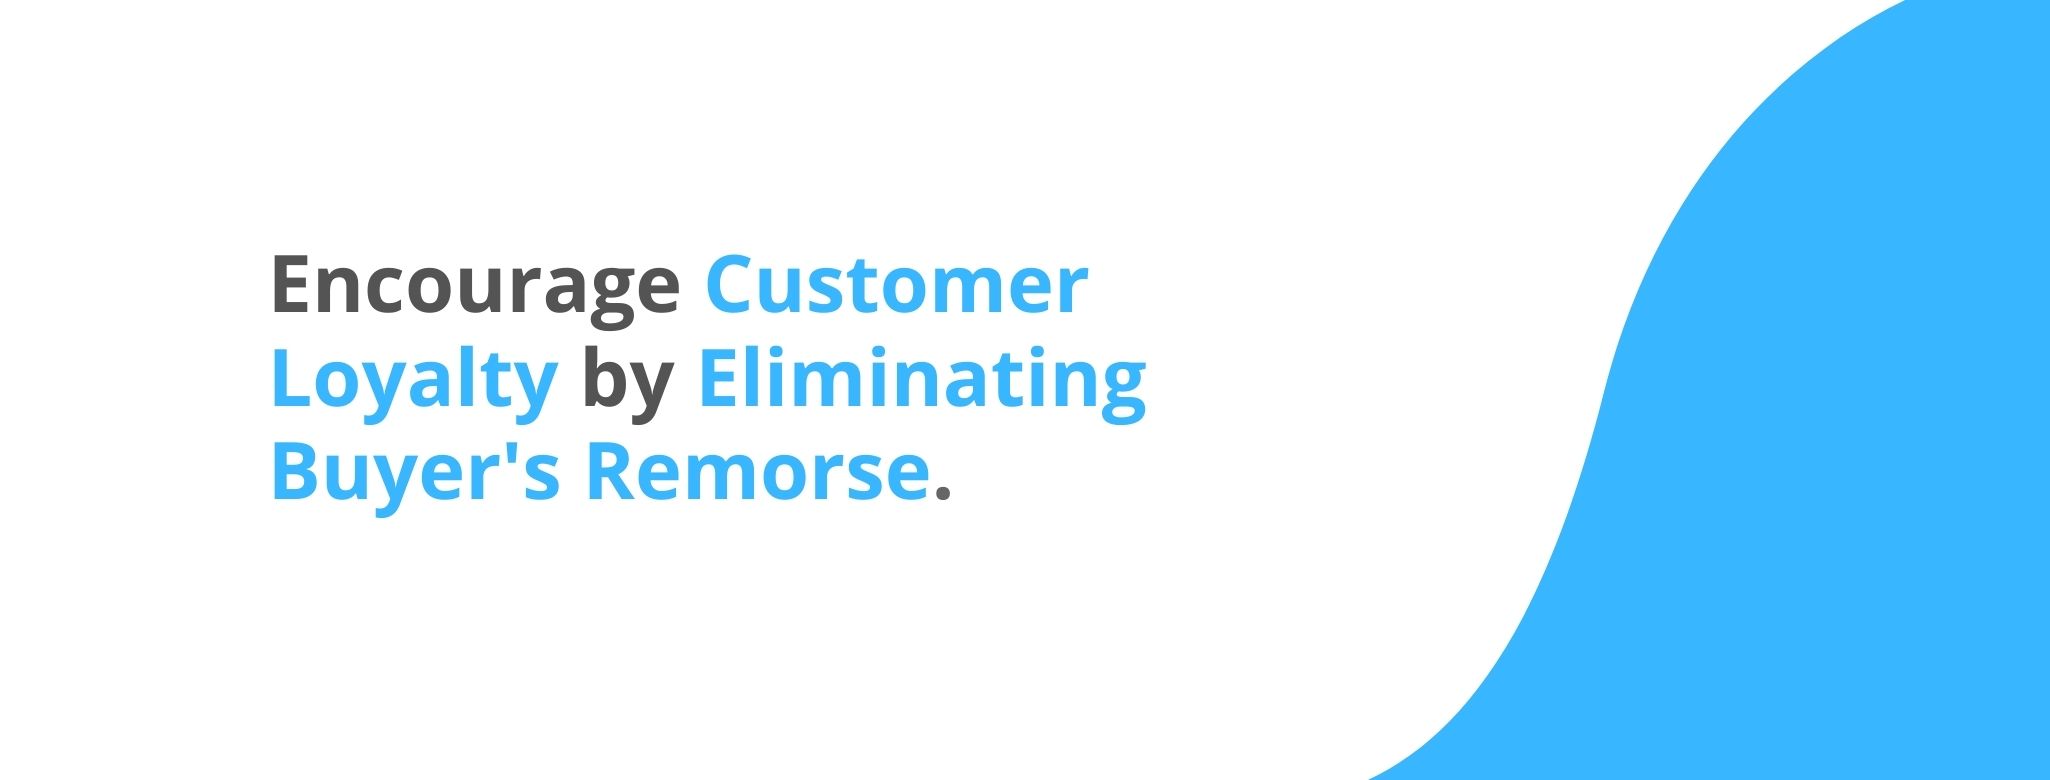 Encourage customer loyalty by eliminating buyer's remorse - 32 Customer Retention Strategies - Replyco